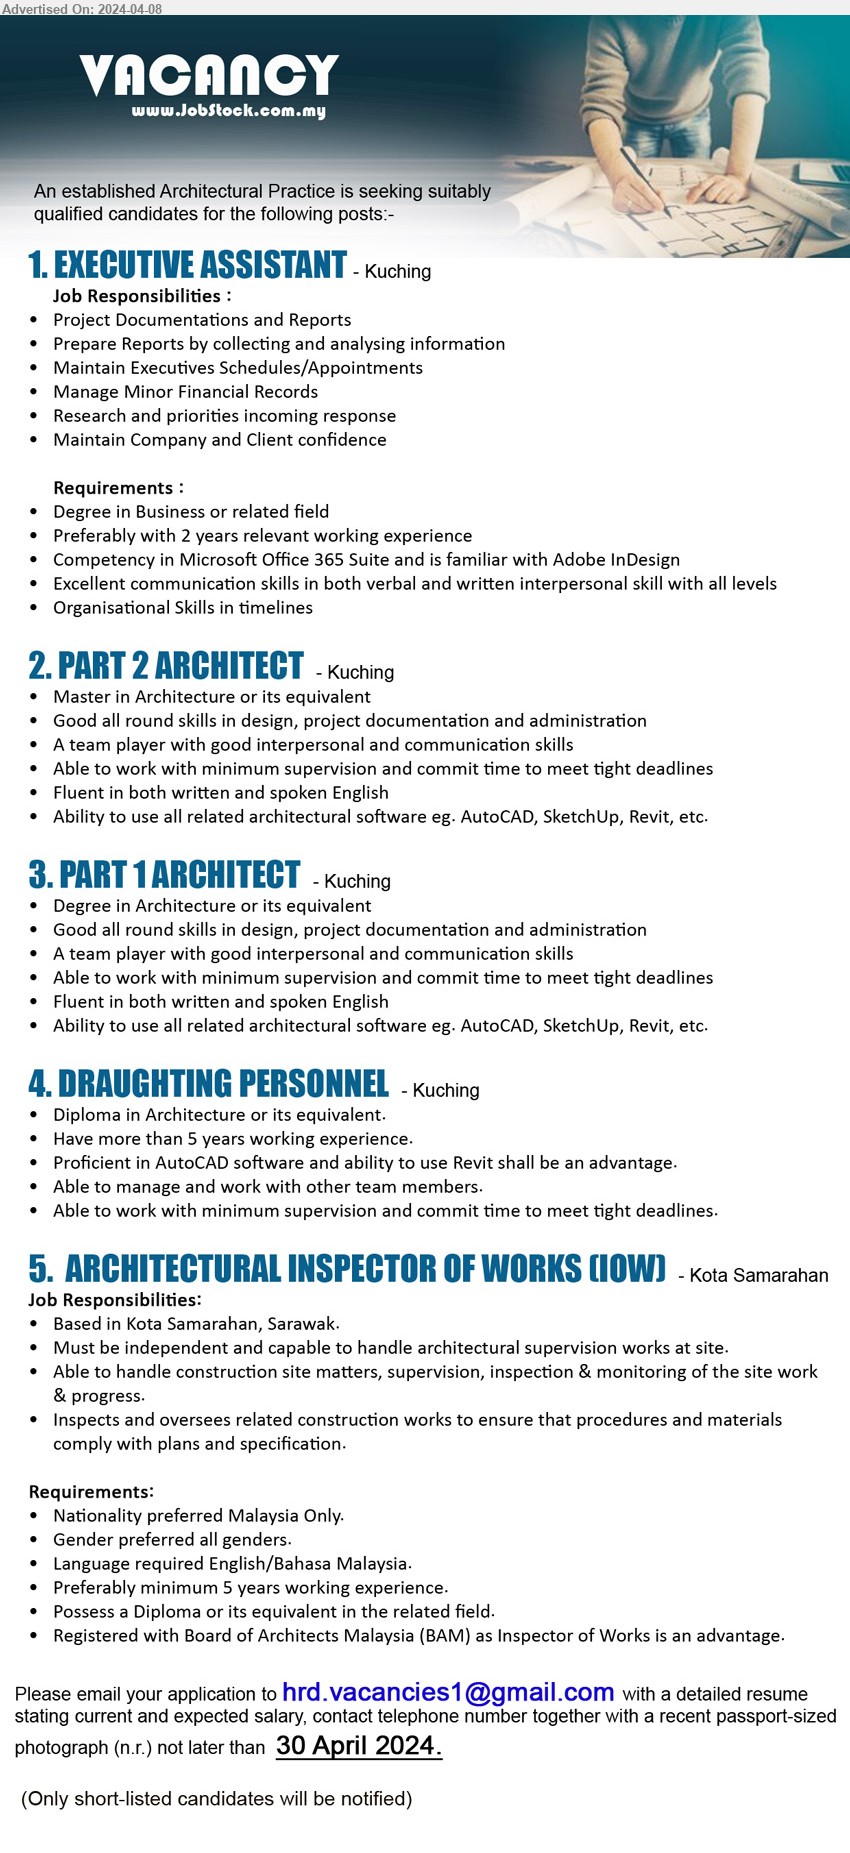 ADVERTISER (Architectural practice) - 1. EXECUTIVE ASSISTANT  (Kuching), Degree in Business or related field, Preferably with 2 yrs. exp.,...
2. PART 2 ARCHITECT (Kuching), Master in Architecture or its equivalent, Good all round skills in design, project documentation and administration,...
3. PART 1 ARCHITECT (Kuching), Degree in Architecture or its equivalent, Good all round skills in design, project documentation and administration,...
4. DRAUGHTING PERSONNEL (Kuching), Diploma in Architecture or its equivalent, Have more than 5 yrs. exp.,...
5. ARCHITECTURAL INSPECTOR OF WORKS (IOW) (Kota Samarahan), Diploma, Registered with Board of Architects Malaysia (BAM) as Inspector of Works ,...
Email resume to ...